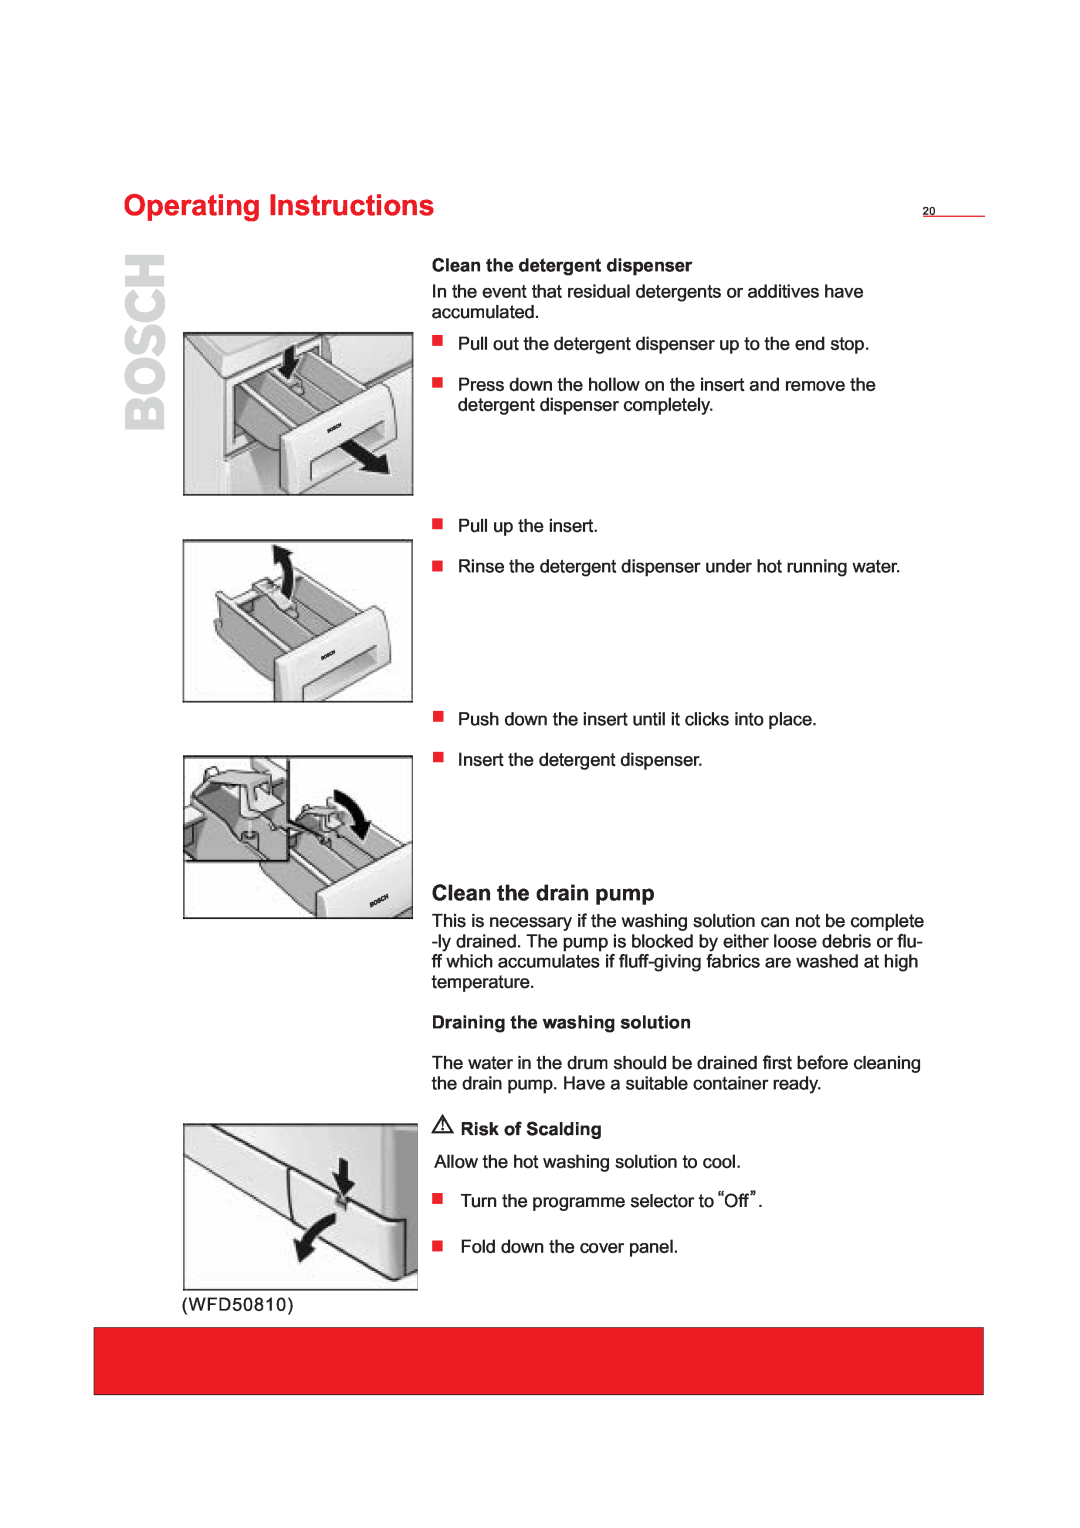 Bosch Appliances WFD50818 Clean the drain pump, Operating Instructions, Clean the detergent dispenser, Risk of Scalding 